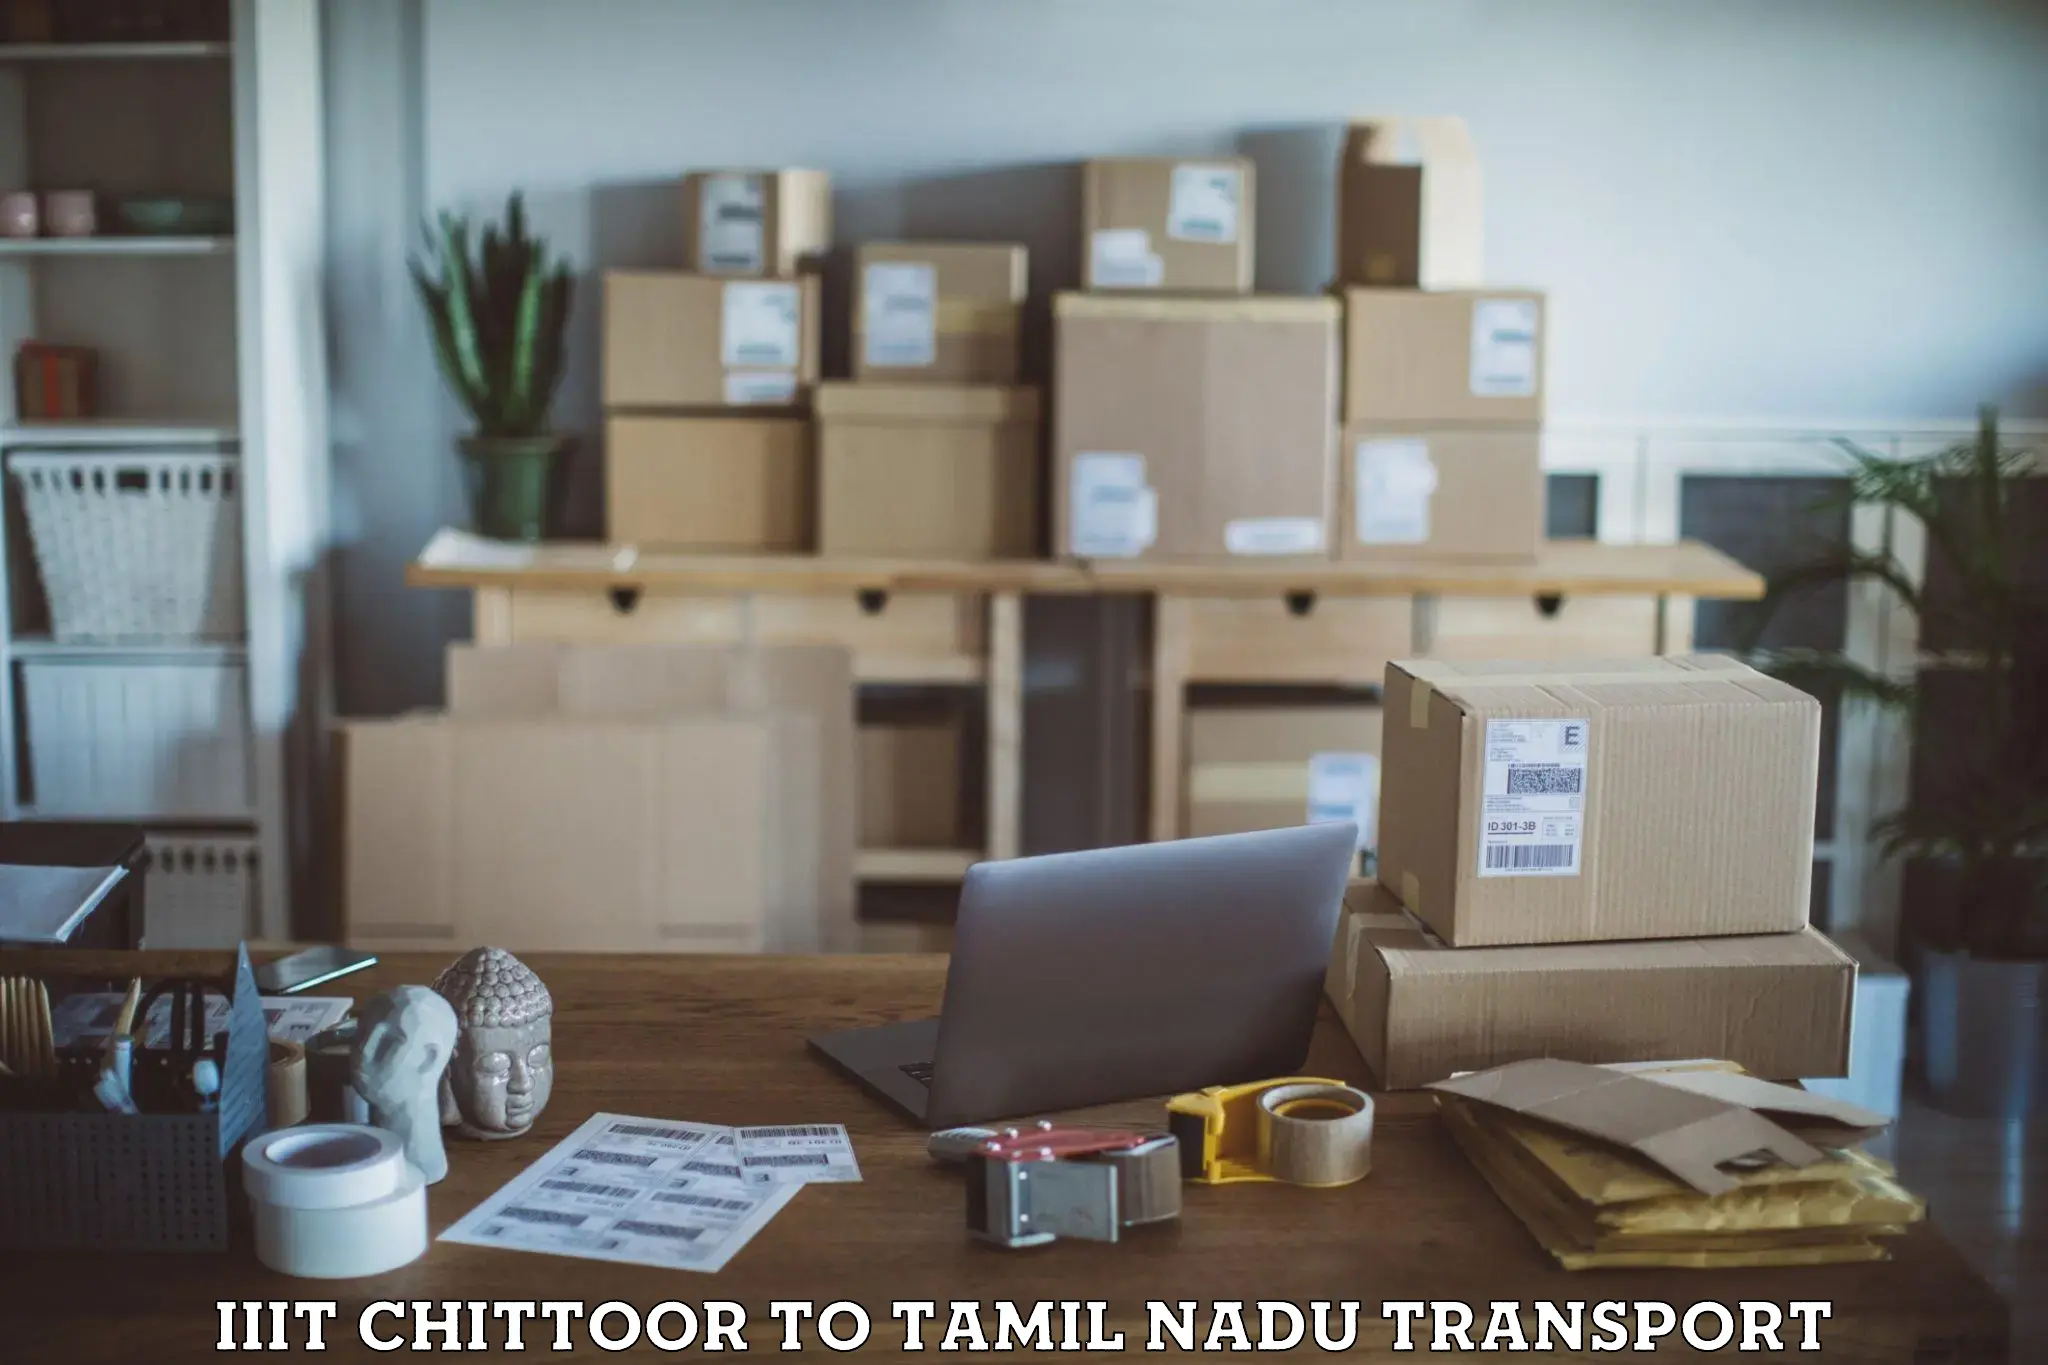 Express transport services IIIT Chittoor to Vellore Institute of Technology